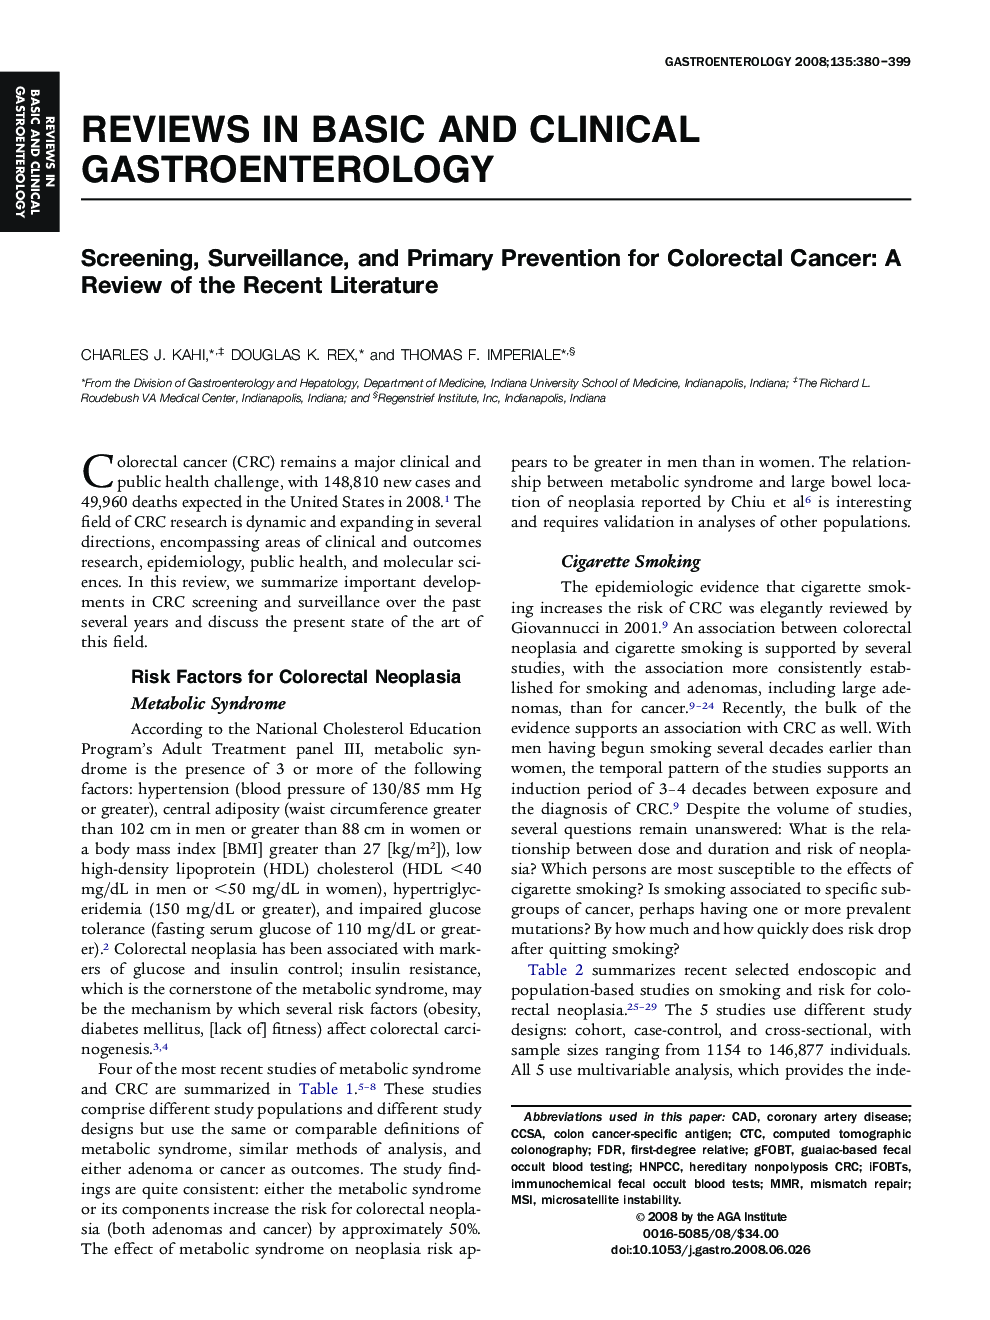 Screening, Surveillance, and Primary Prevention for Colorectal Cancer: A Review of the Recent Literature